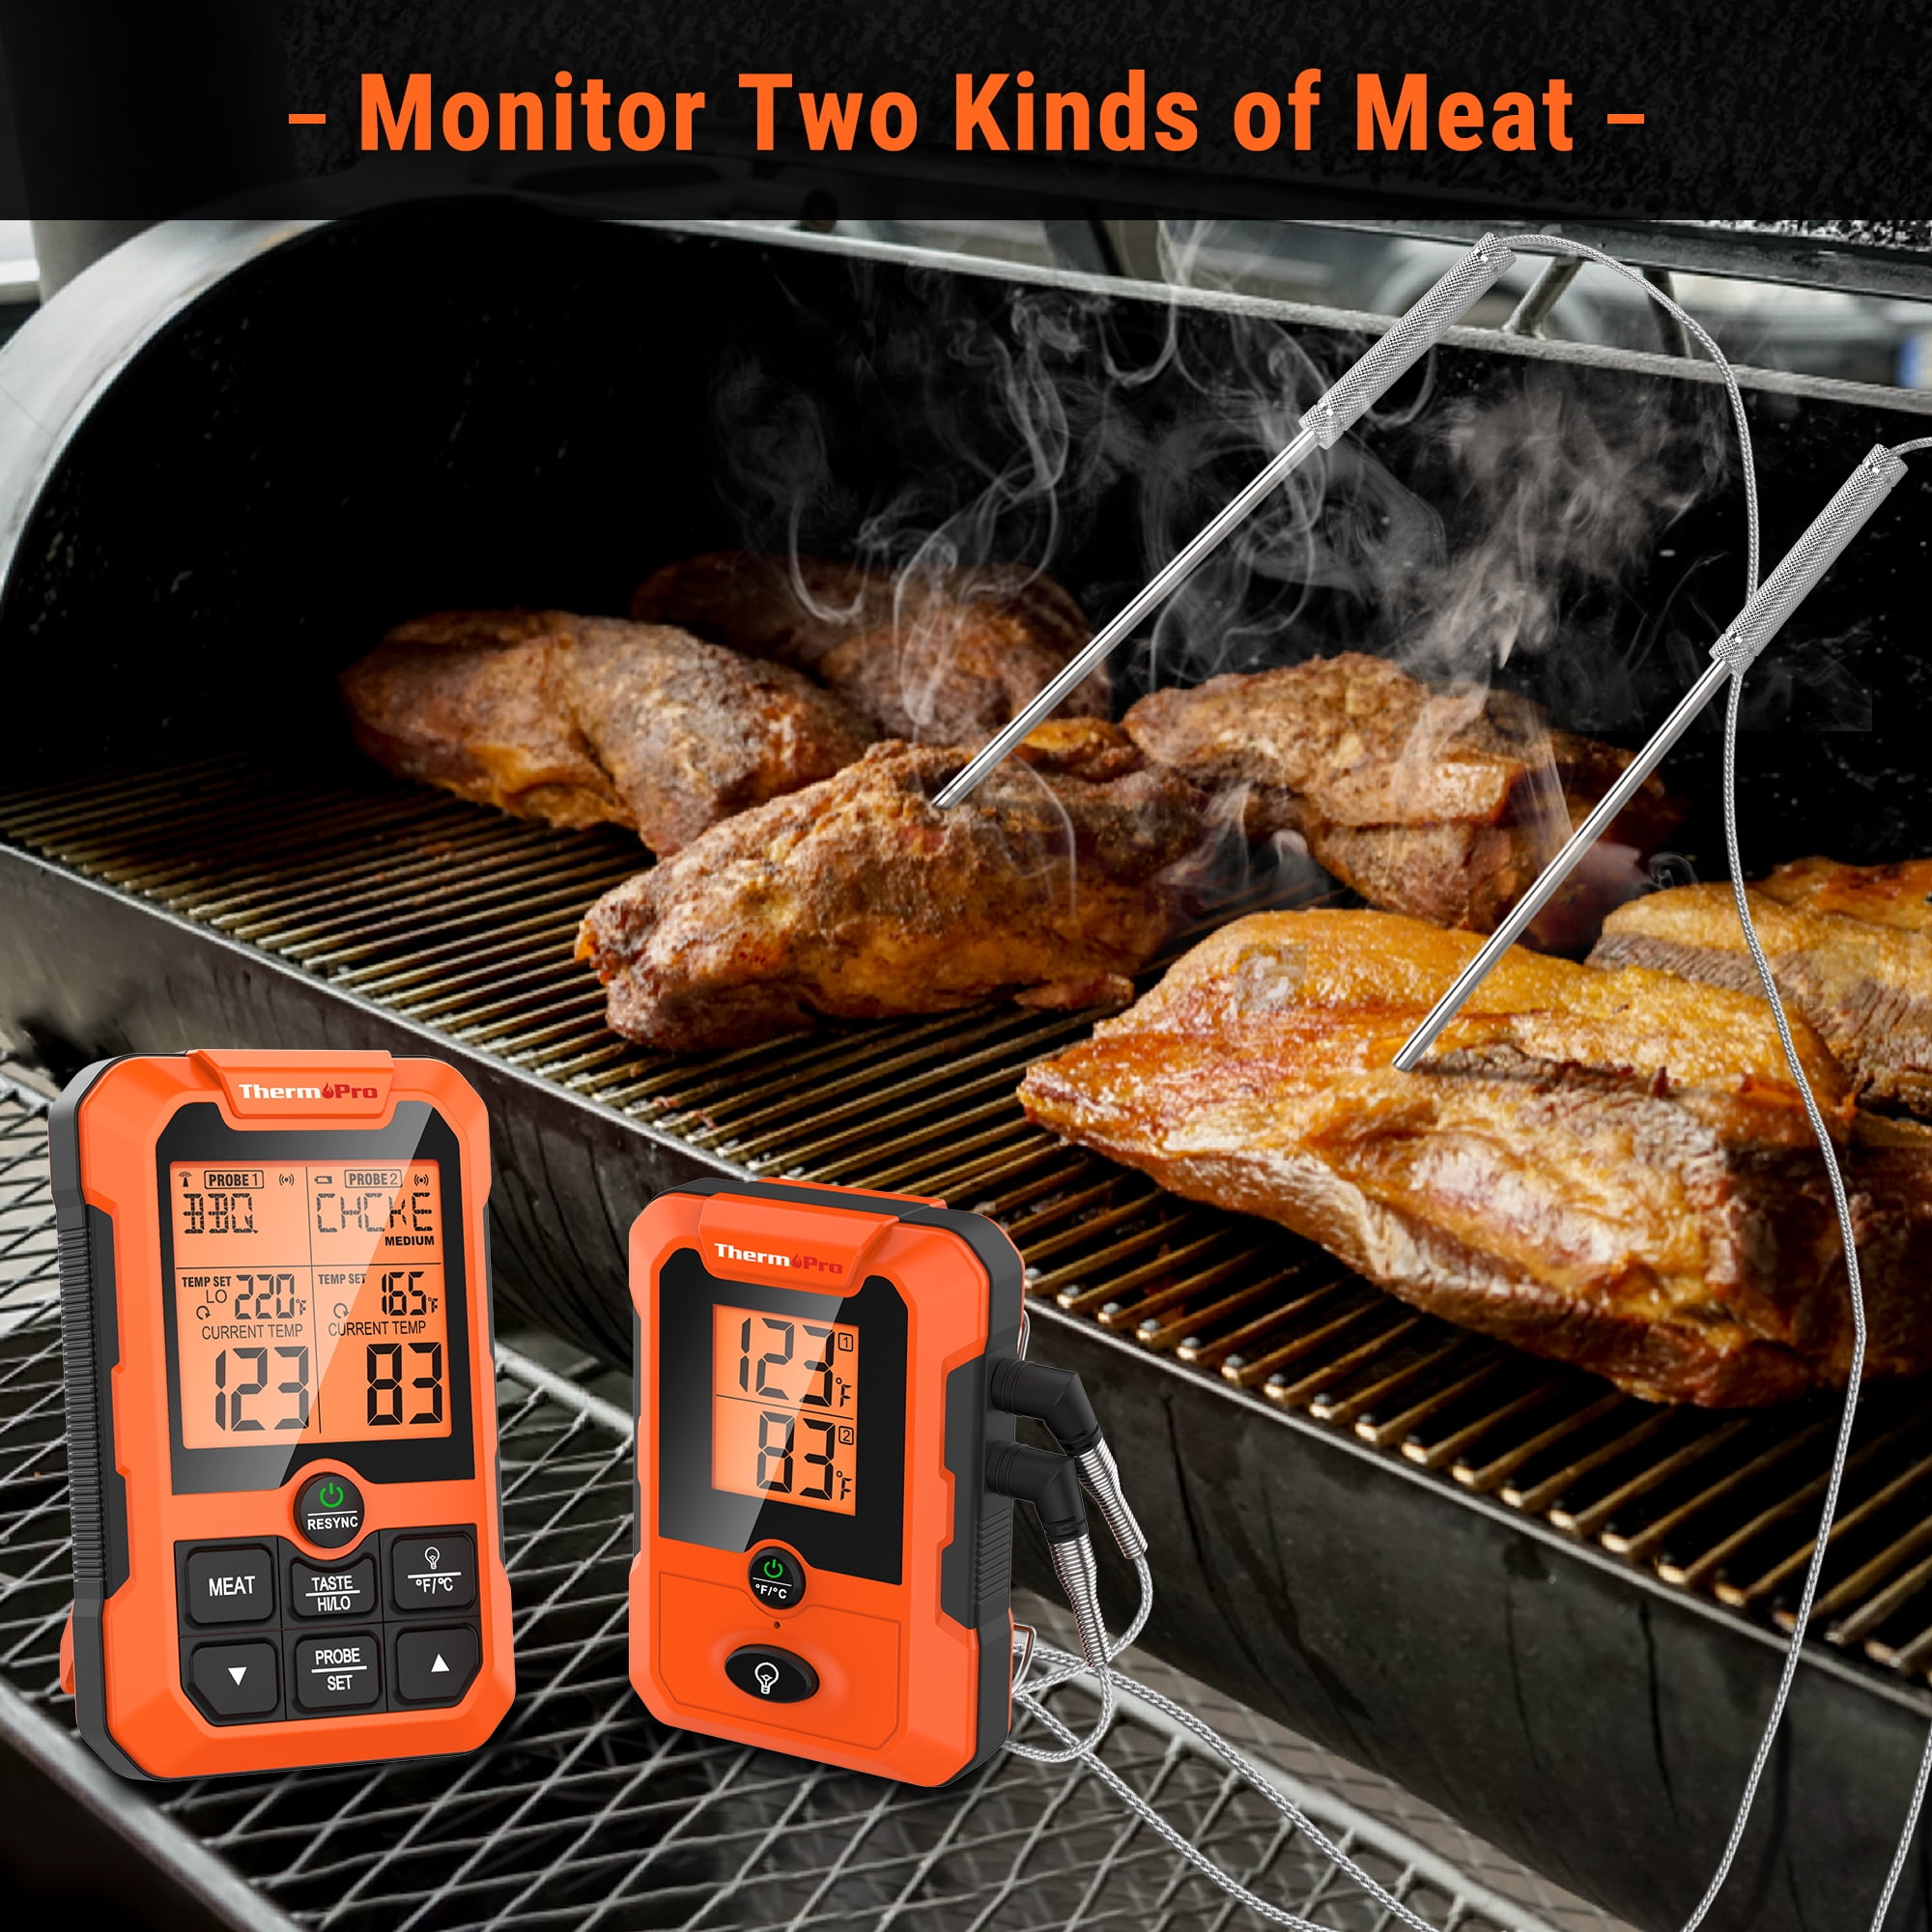 ThermoPro Thermometer Dual Smoker Smart Thermometer 500FT, Meat Meat for BBQ Dual of with Probe Rechargeable Wireless Turkey Cooking Beef Grill Thermometer Thermometer Probes, Oven, TP810W for Fish